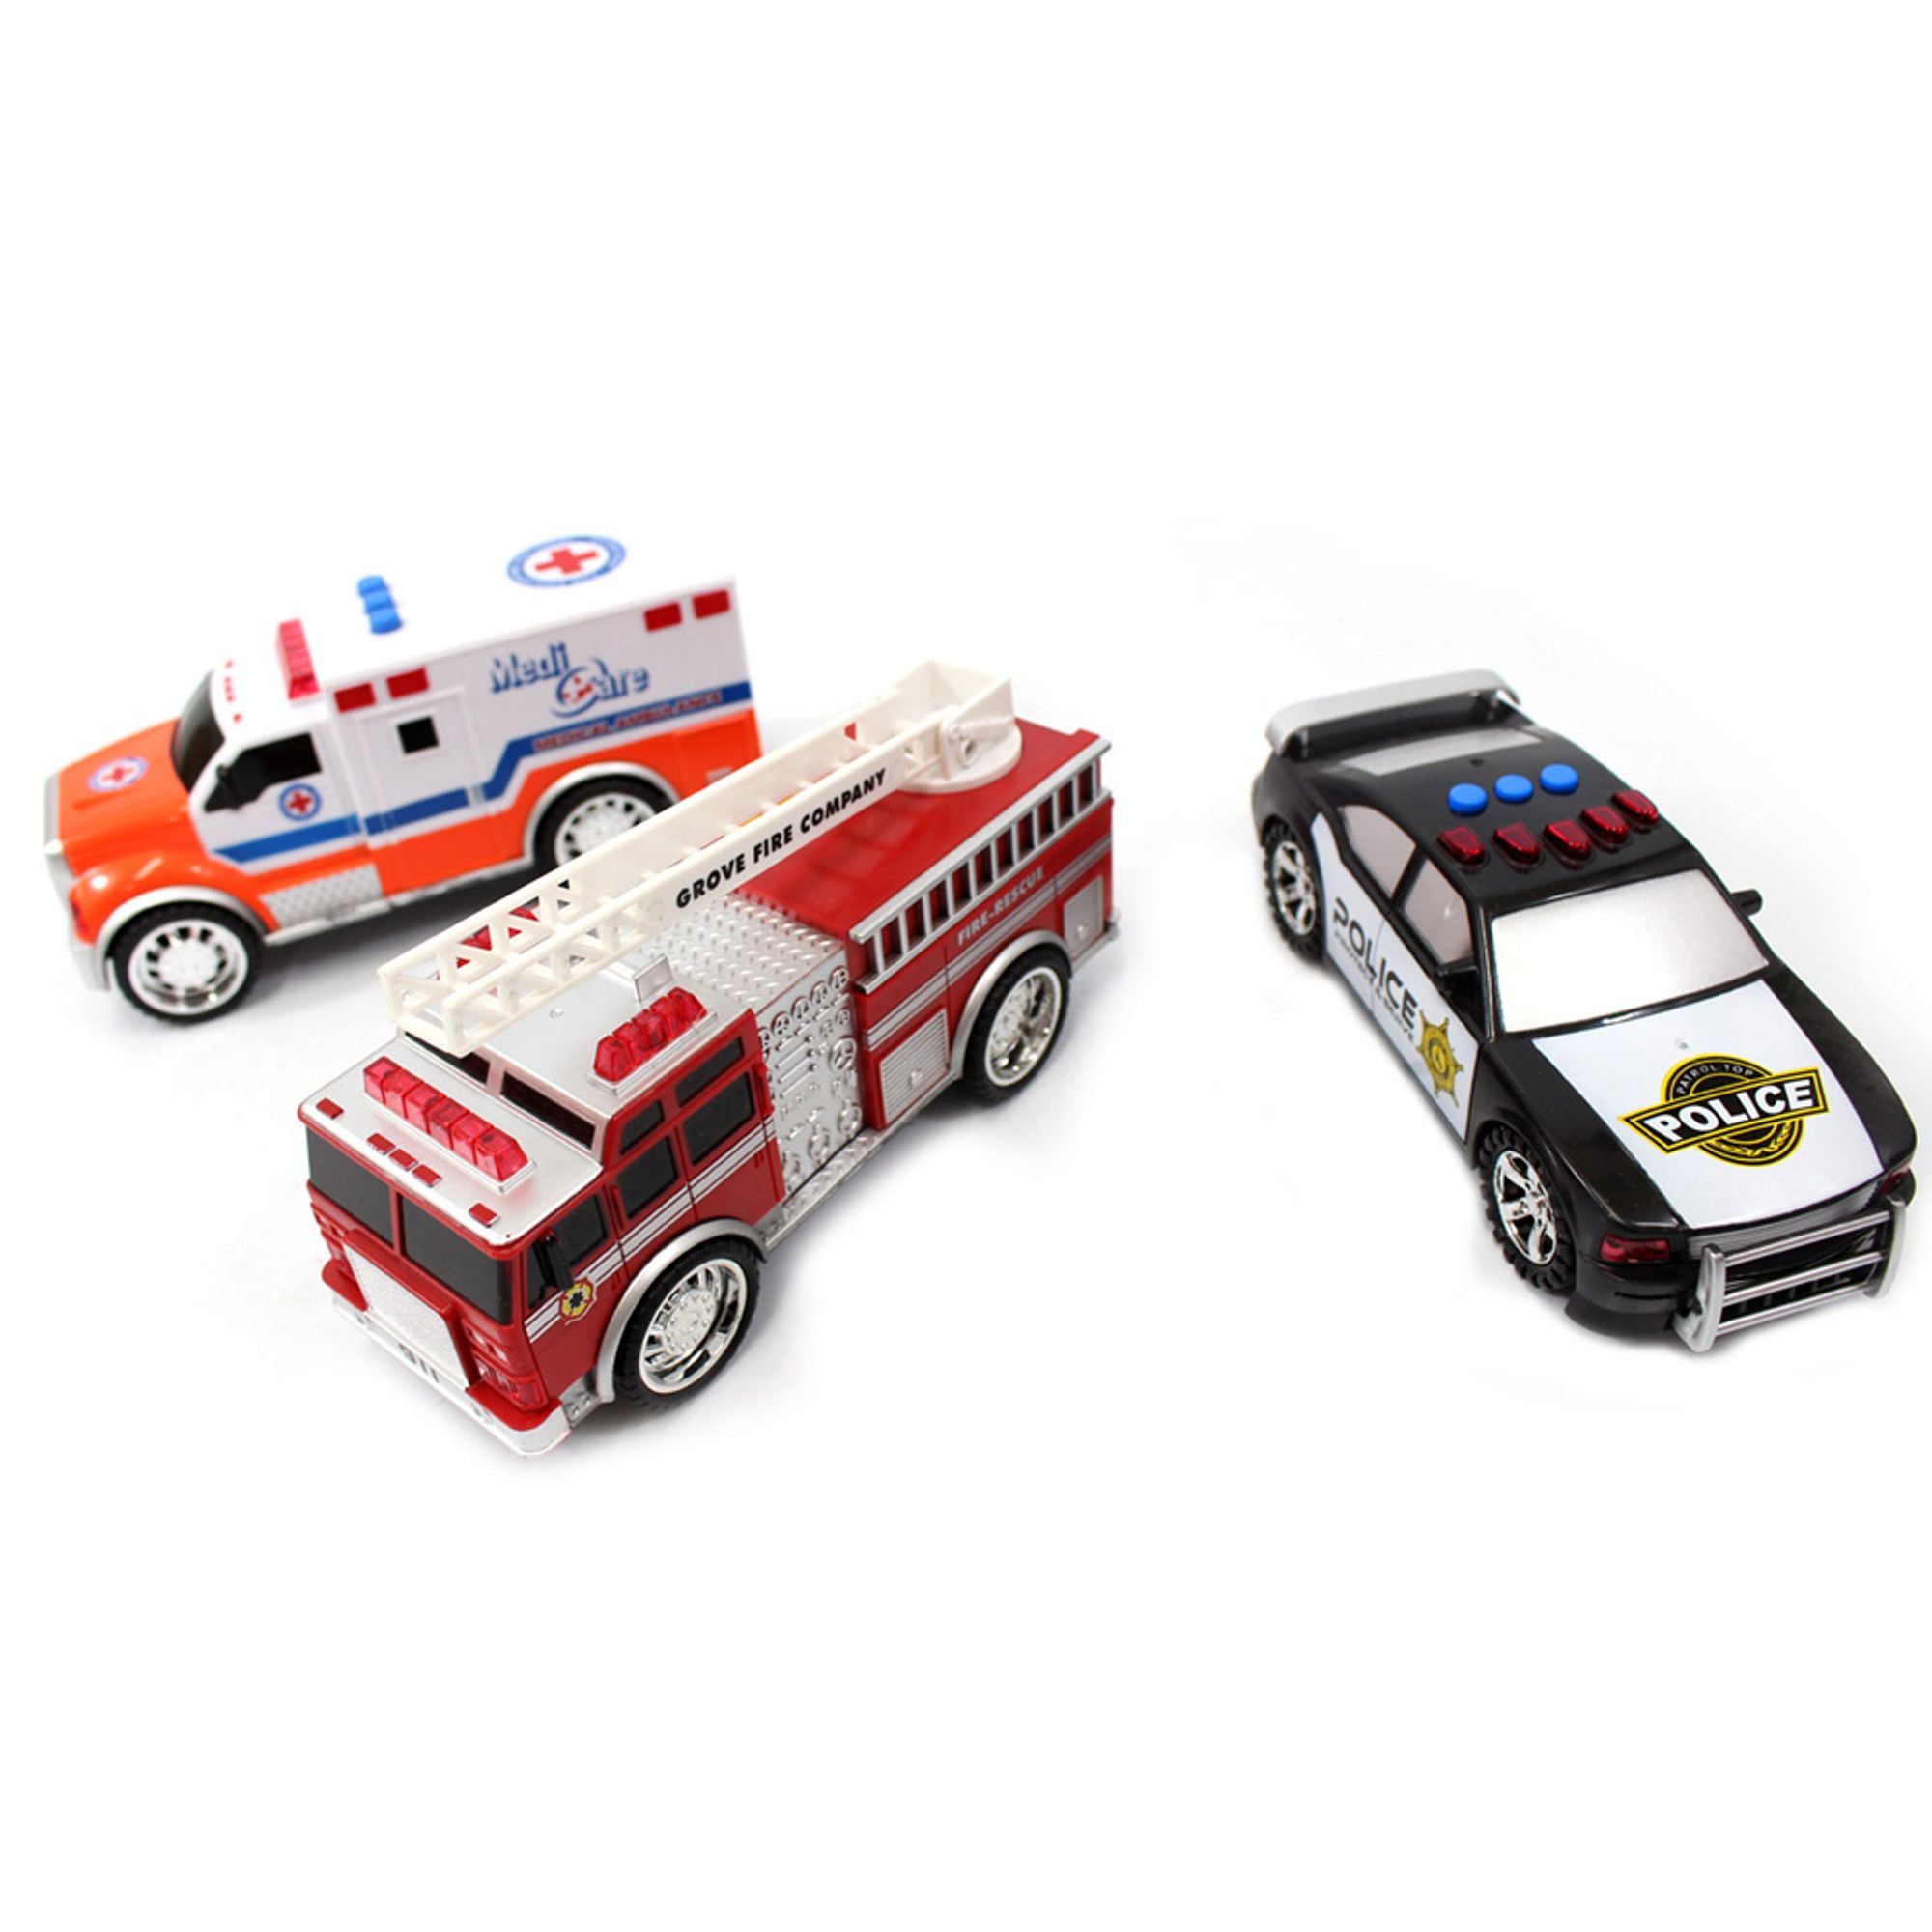 Die Cast Metal Emergency Services toys POLICE AMBULANCE Fire Engine boxed set 